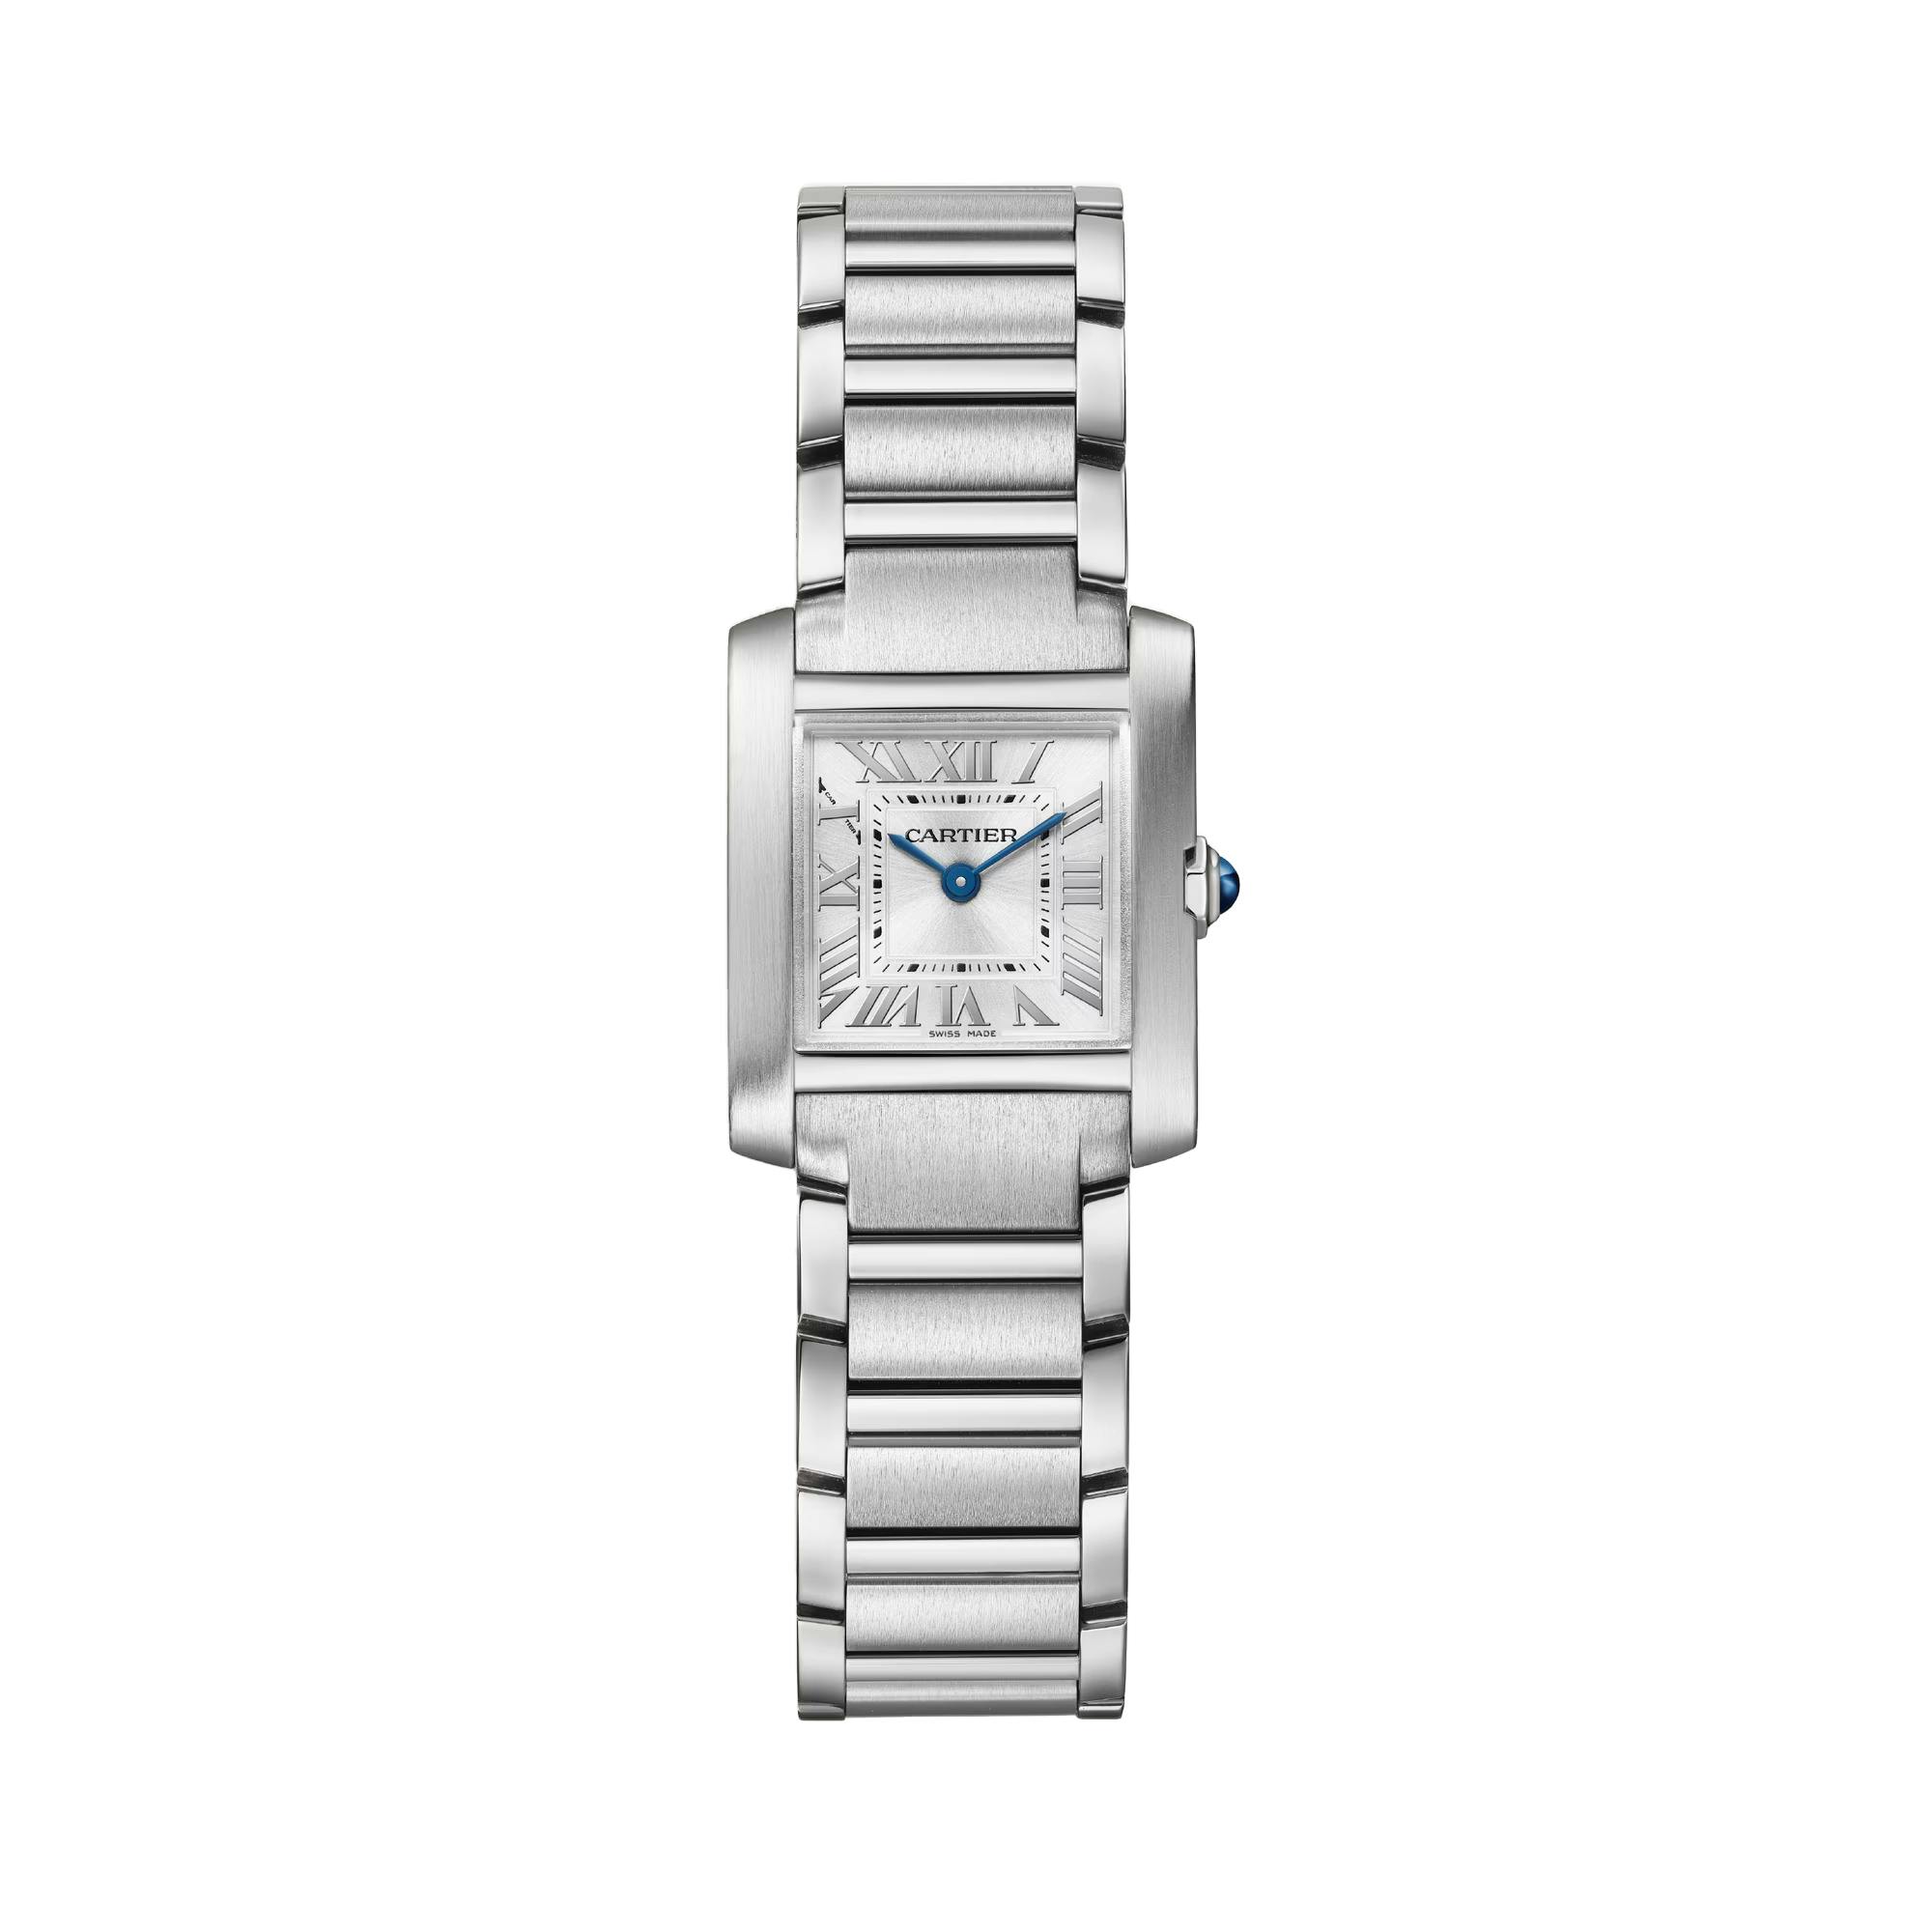 Cartier Tank Francaise Watch, small model 0